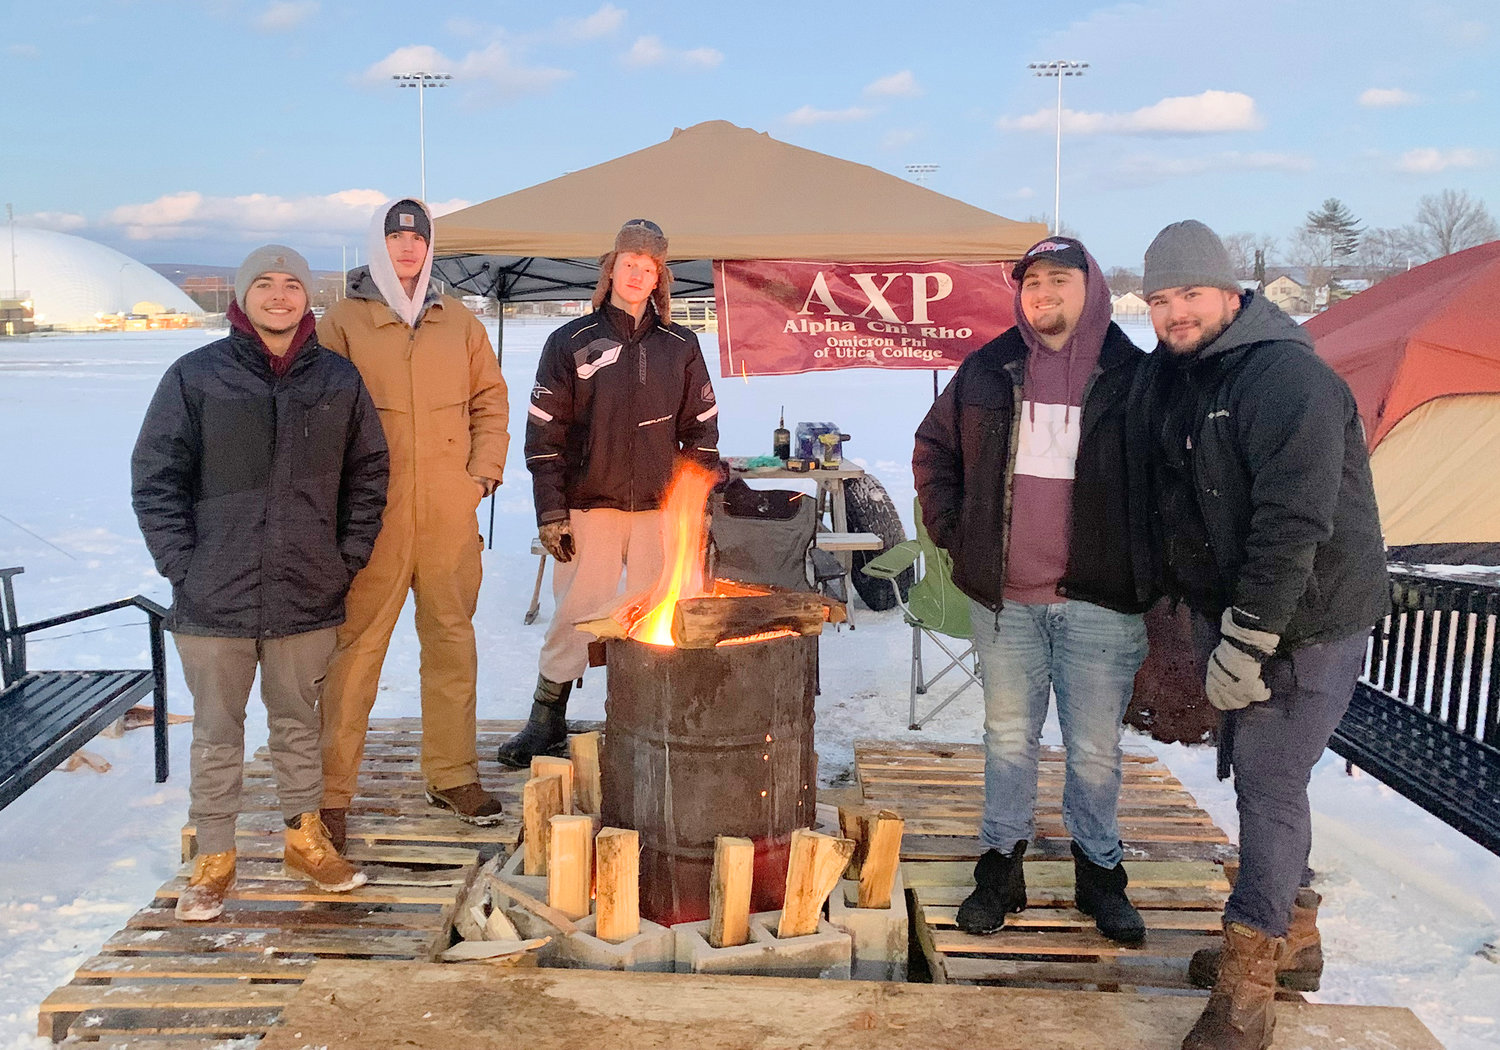 The brothers of Alpha Chi Rho (AXP) at Utica University are freezing, and it’s all for a good cause. The fraternity is conducting their annual Deep Freeze event to raise funds and awareness for the American Cancer Society. The brothers will be “freezing for a reason” through March 5.